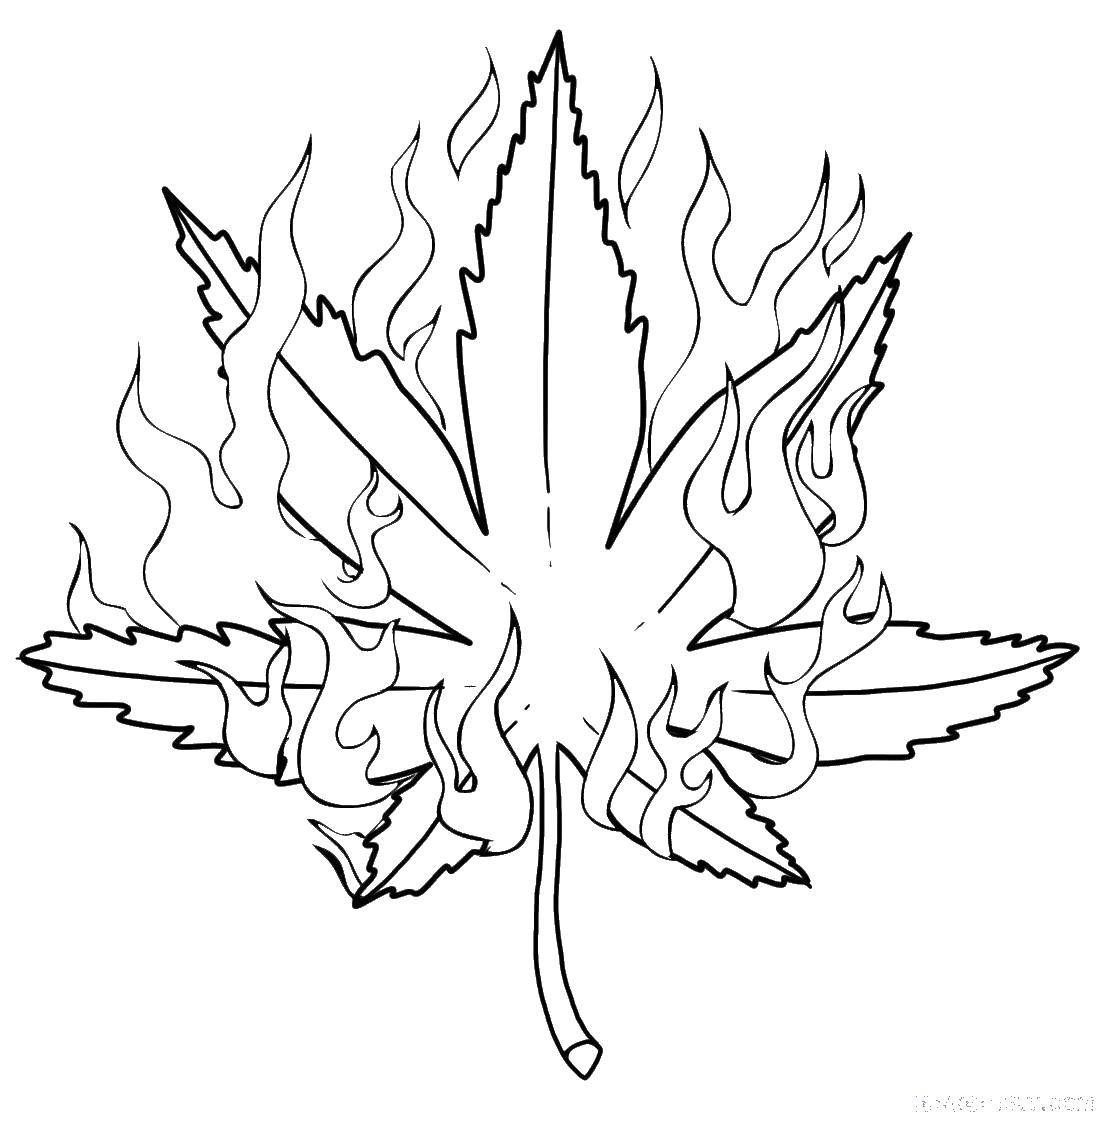 Coloring A leaf in the fire. Category leaves. Tags:  leaf, fire, flame.